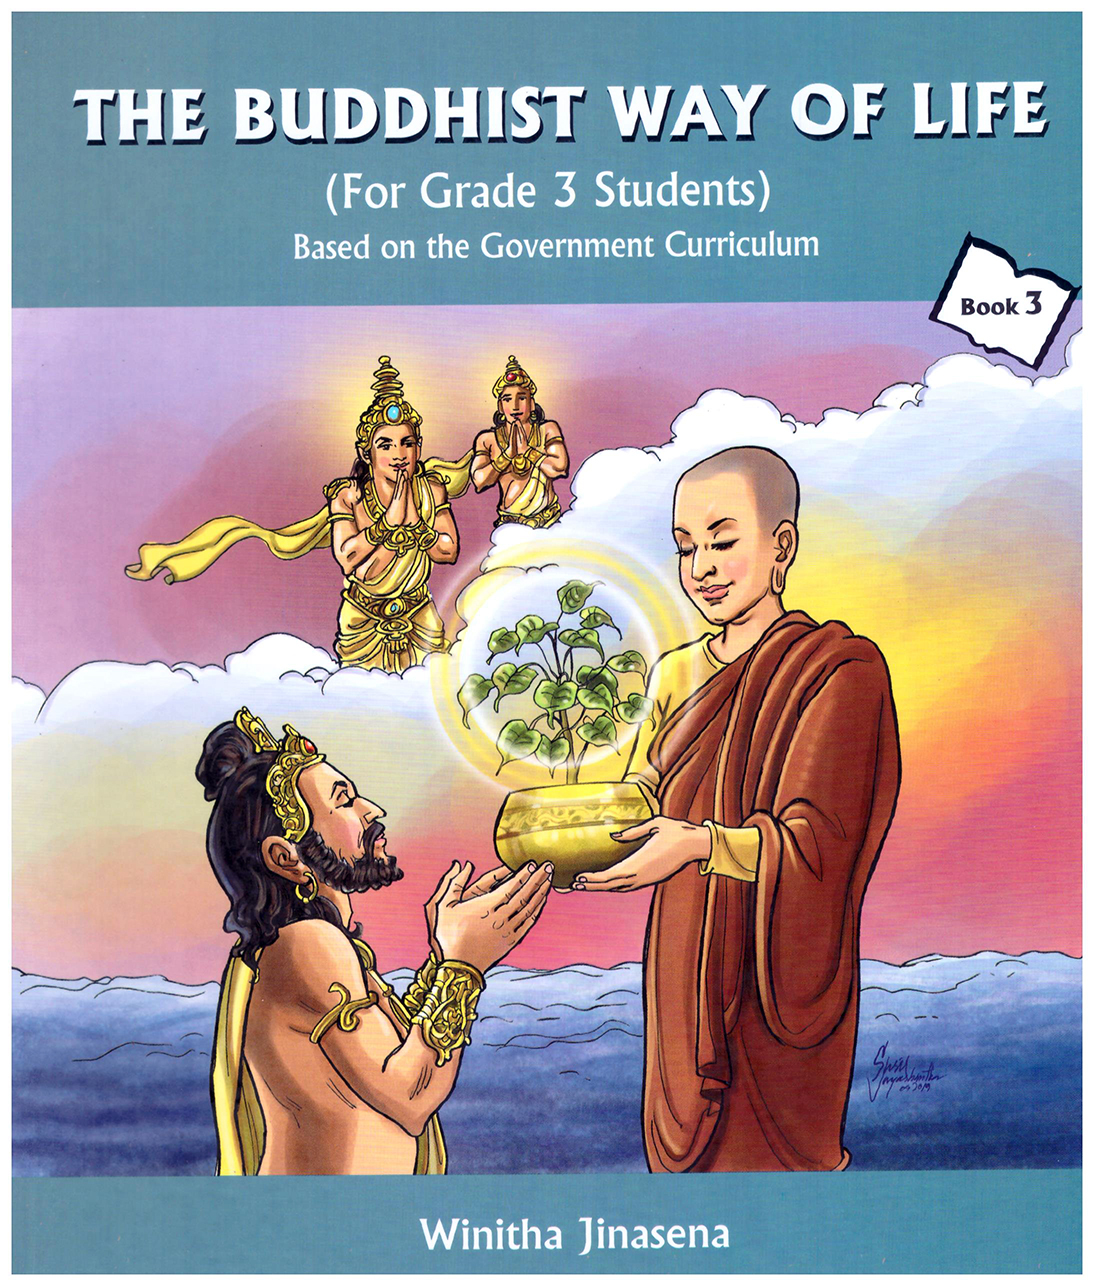 The Buddhist Way of Life Book 3